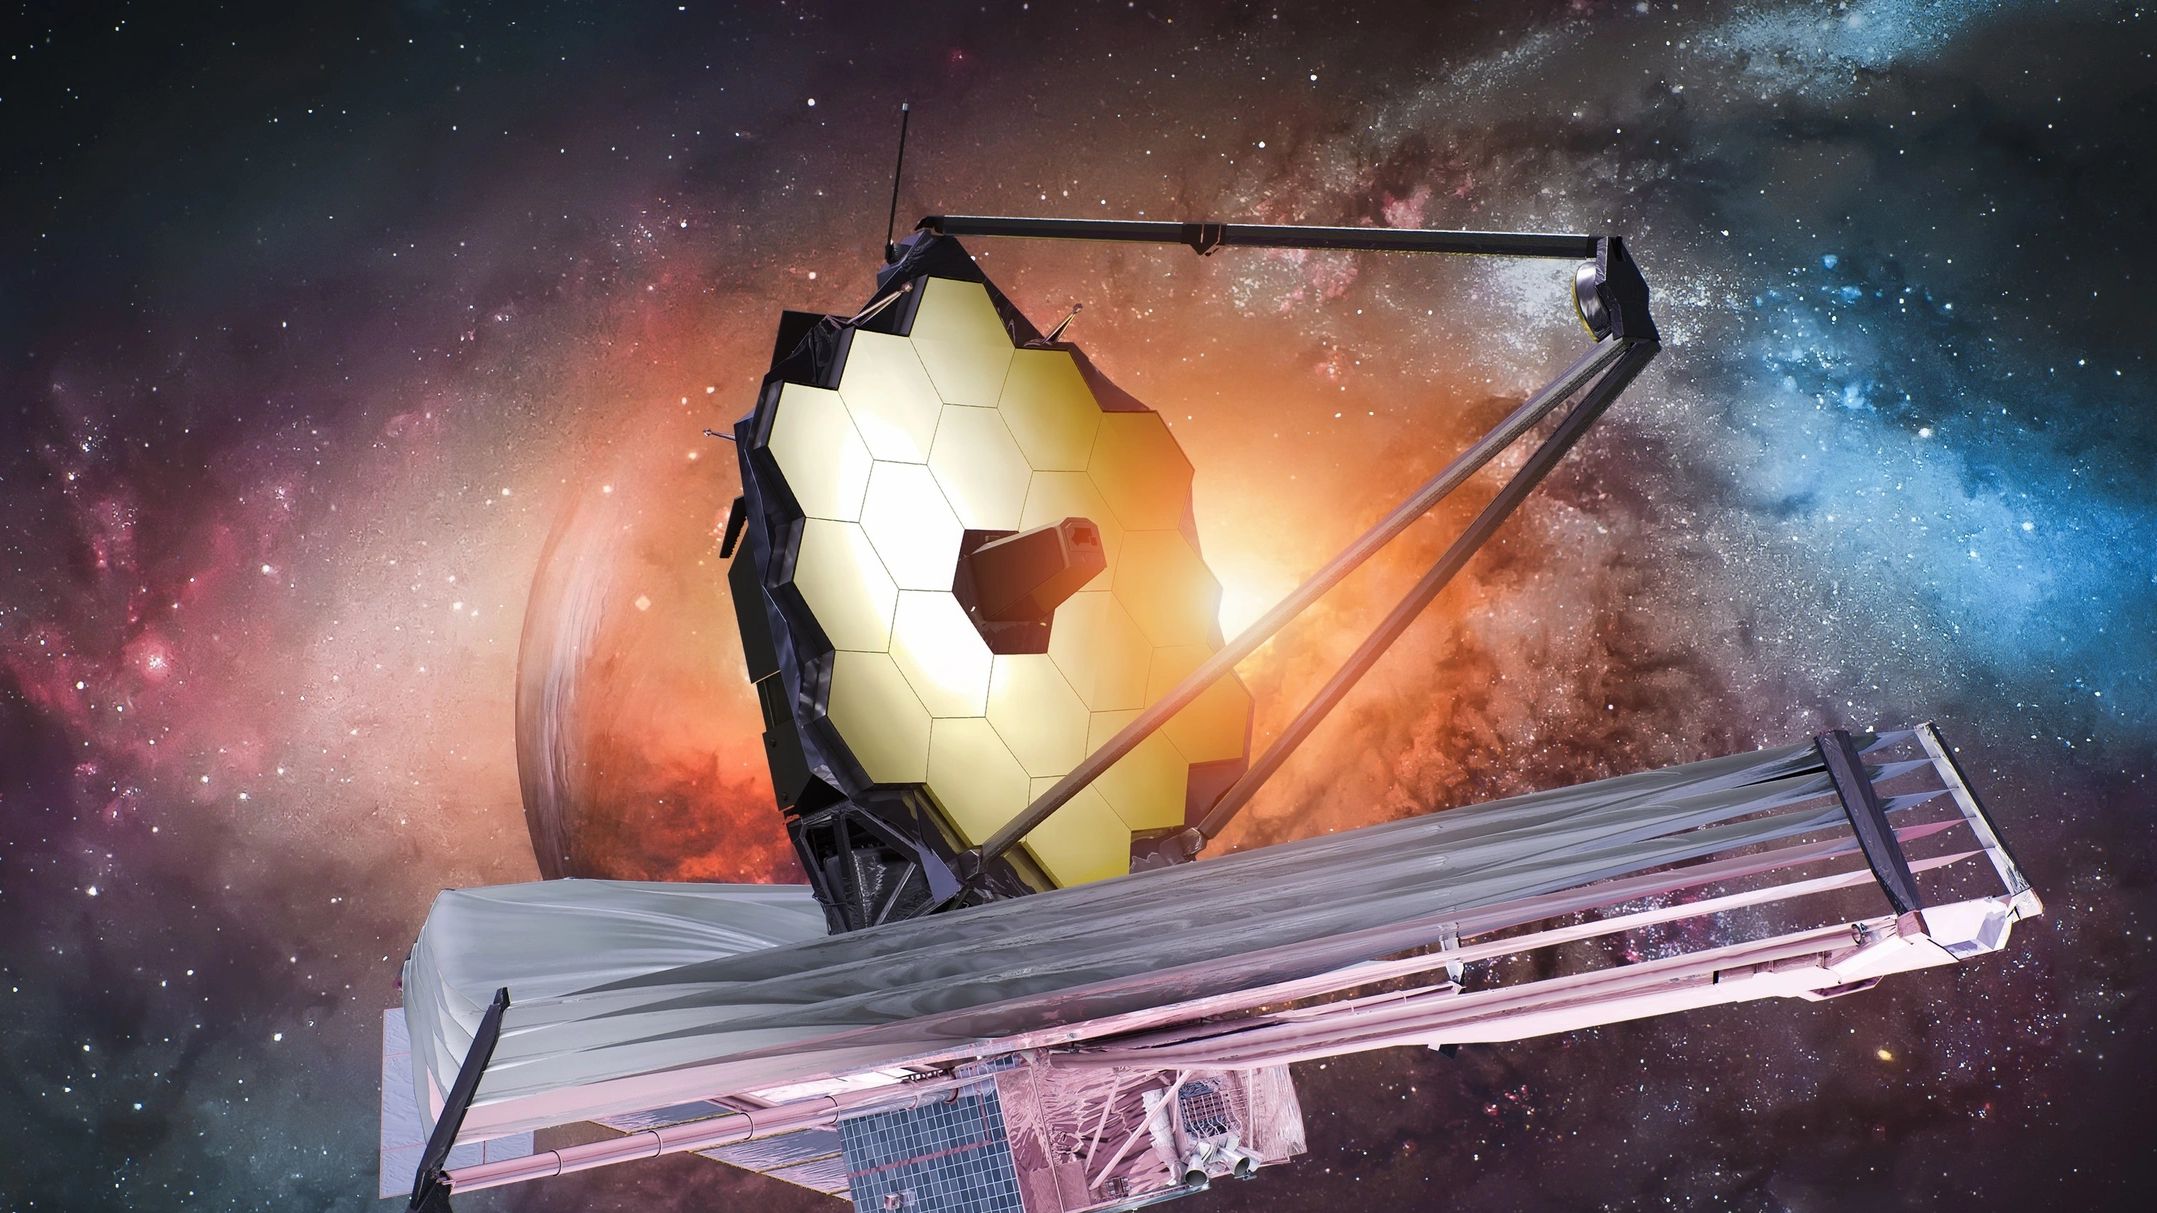 James Webb Space Telescope,
 Launched on December 25, 2021,
 1-Million miles from Earth